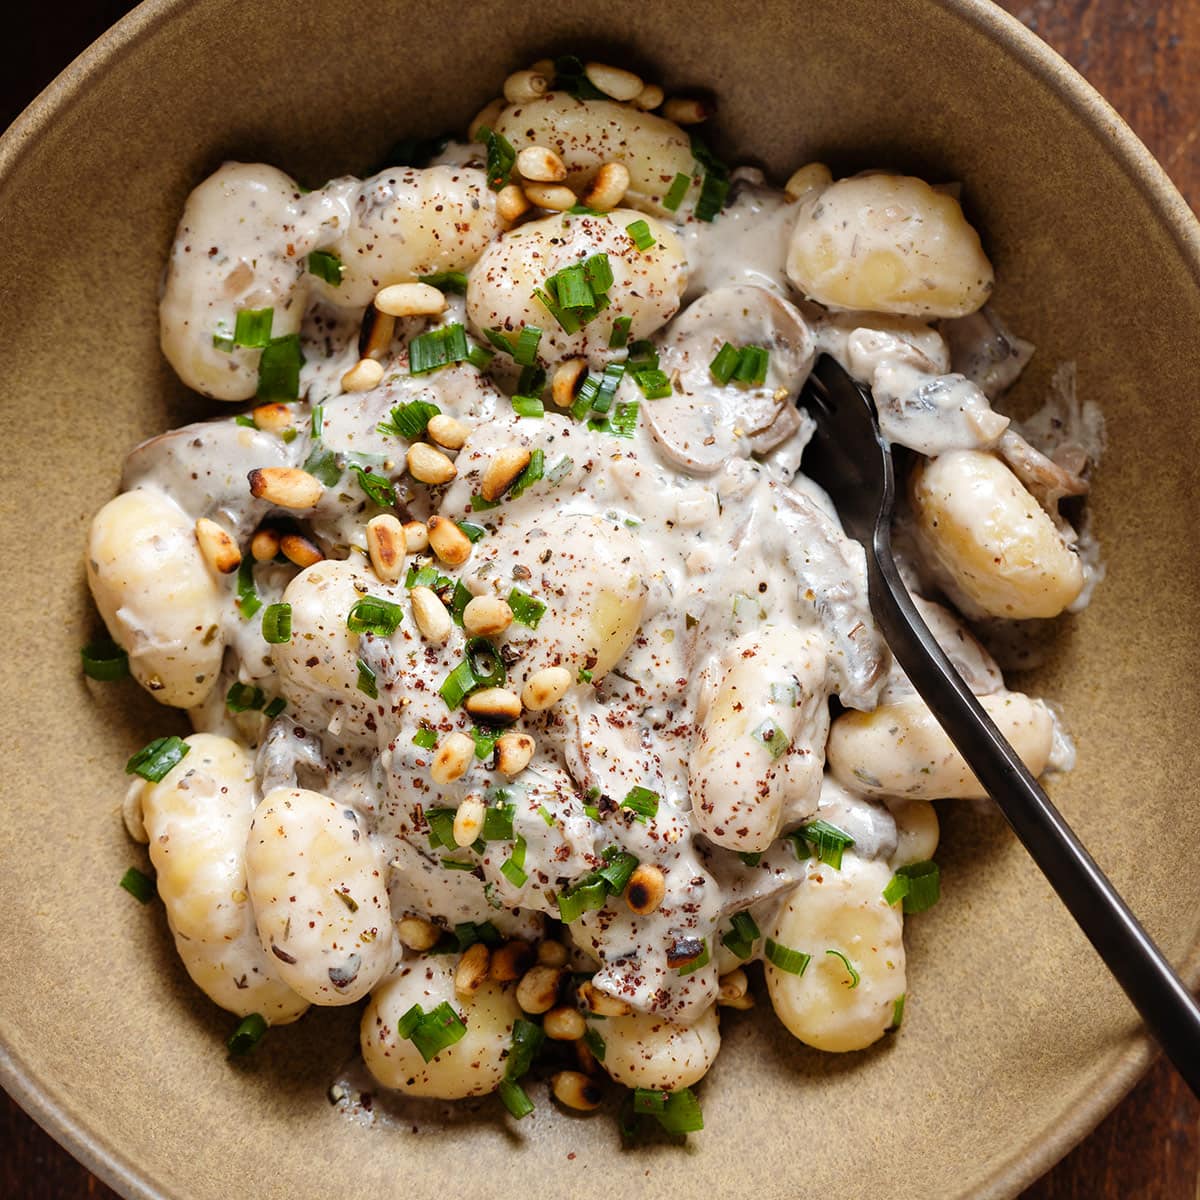 These Creamy Mushroom Gnocchi are creamy, garlicky, herby, and so easy to make! Ready on the table in less than 30 minutes! #mushroomgnocchi thehealthfulideas.com/creamy-mushroo…